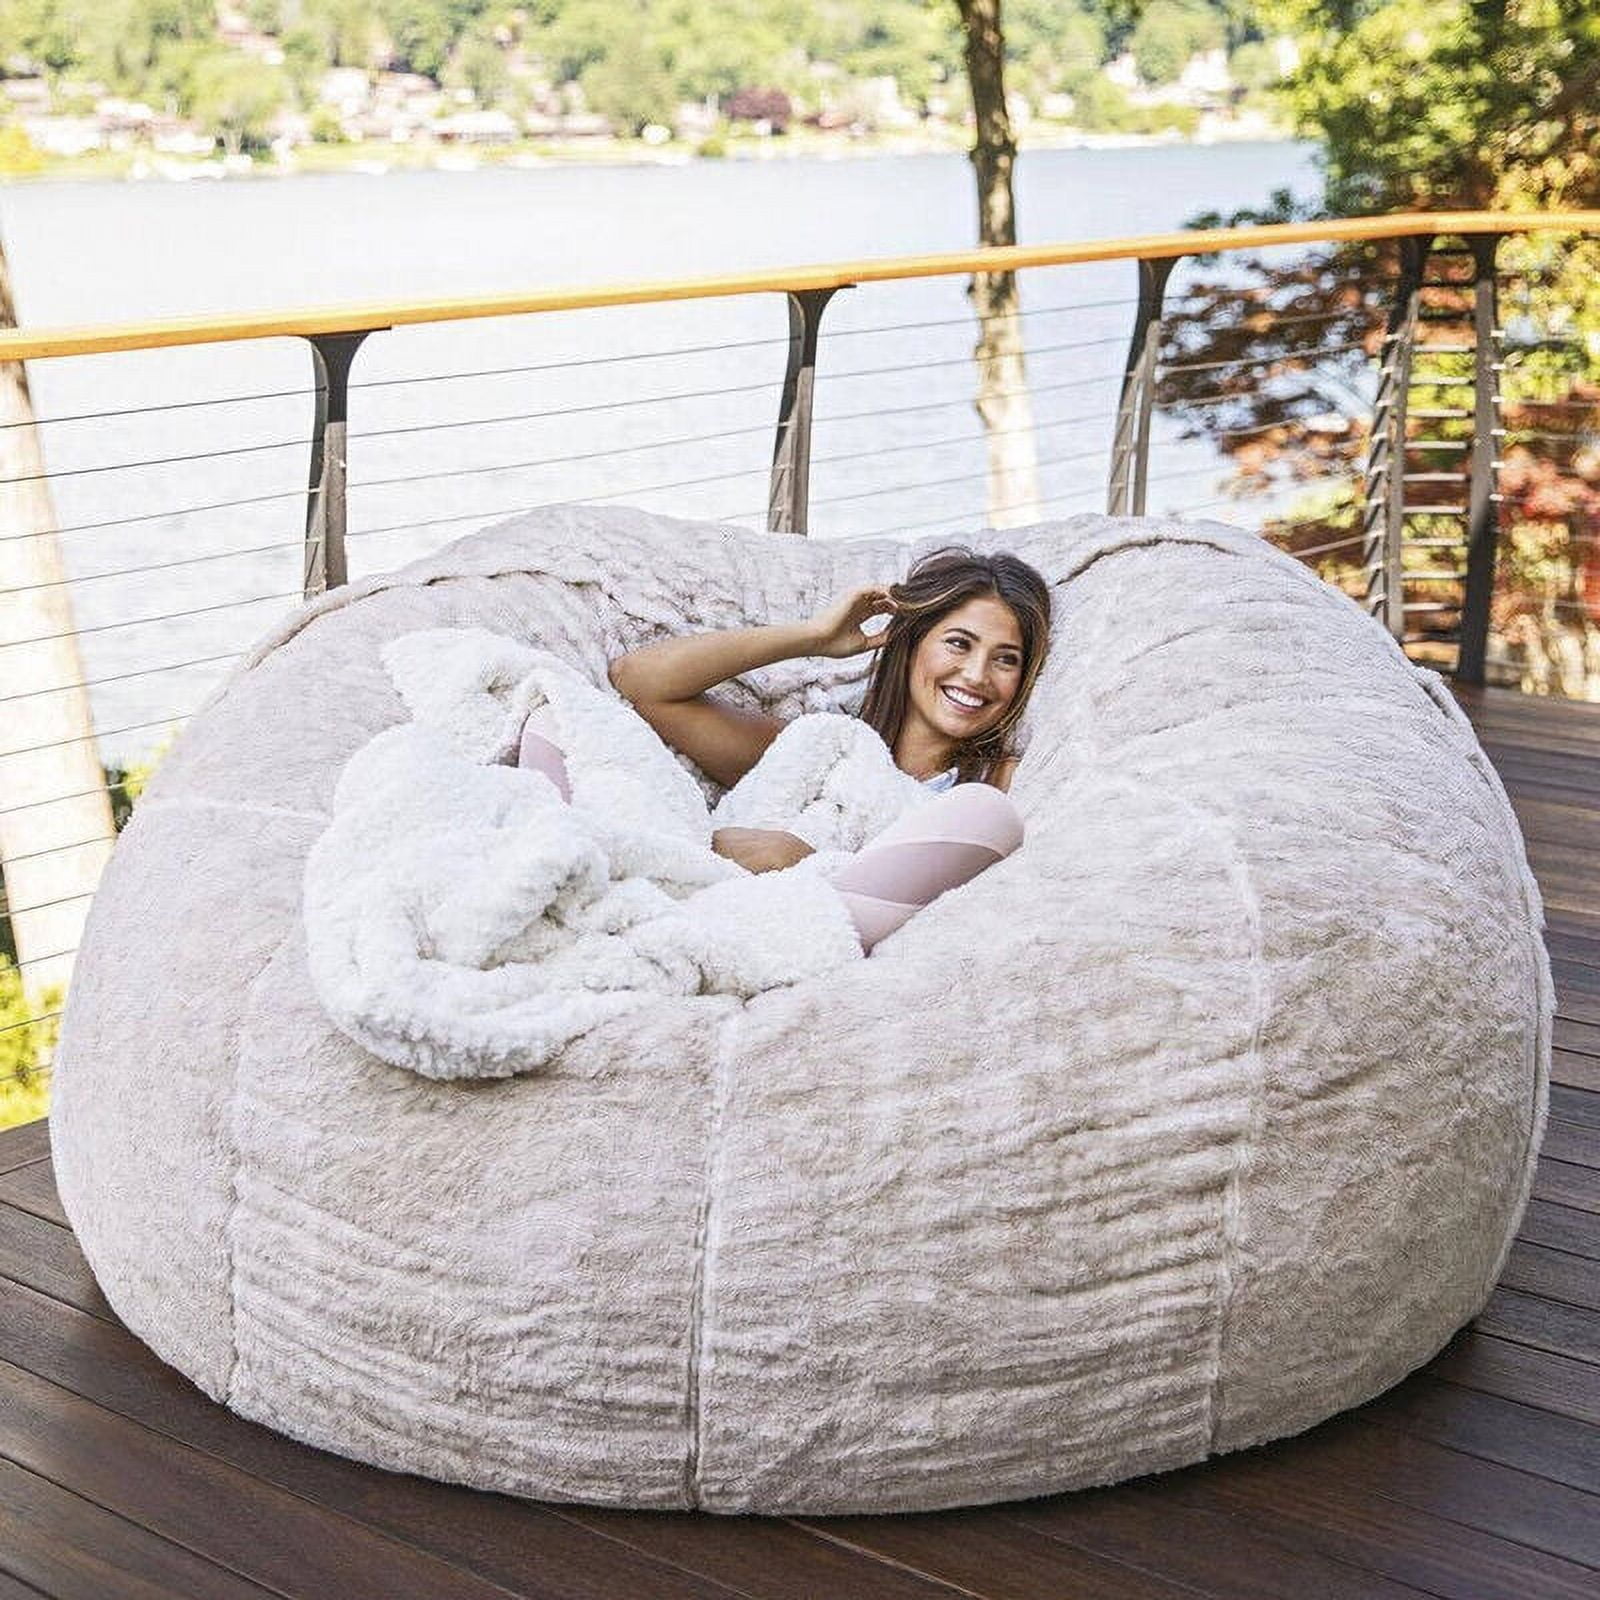 Recaceik Bean Bag Chairs, Soft Cotton Linen Bean Bag Chair with Filler, Fluffy Lazy Sofa, Comfy Cozy Beanbag Chair with Memory Foam for Small Spaces